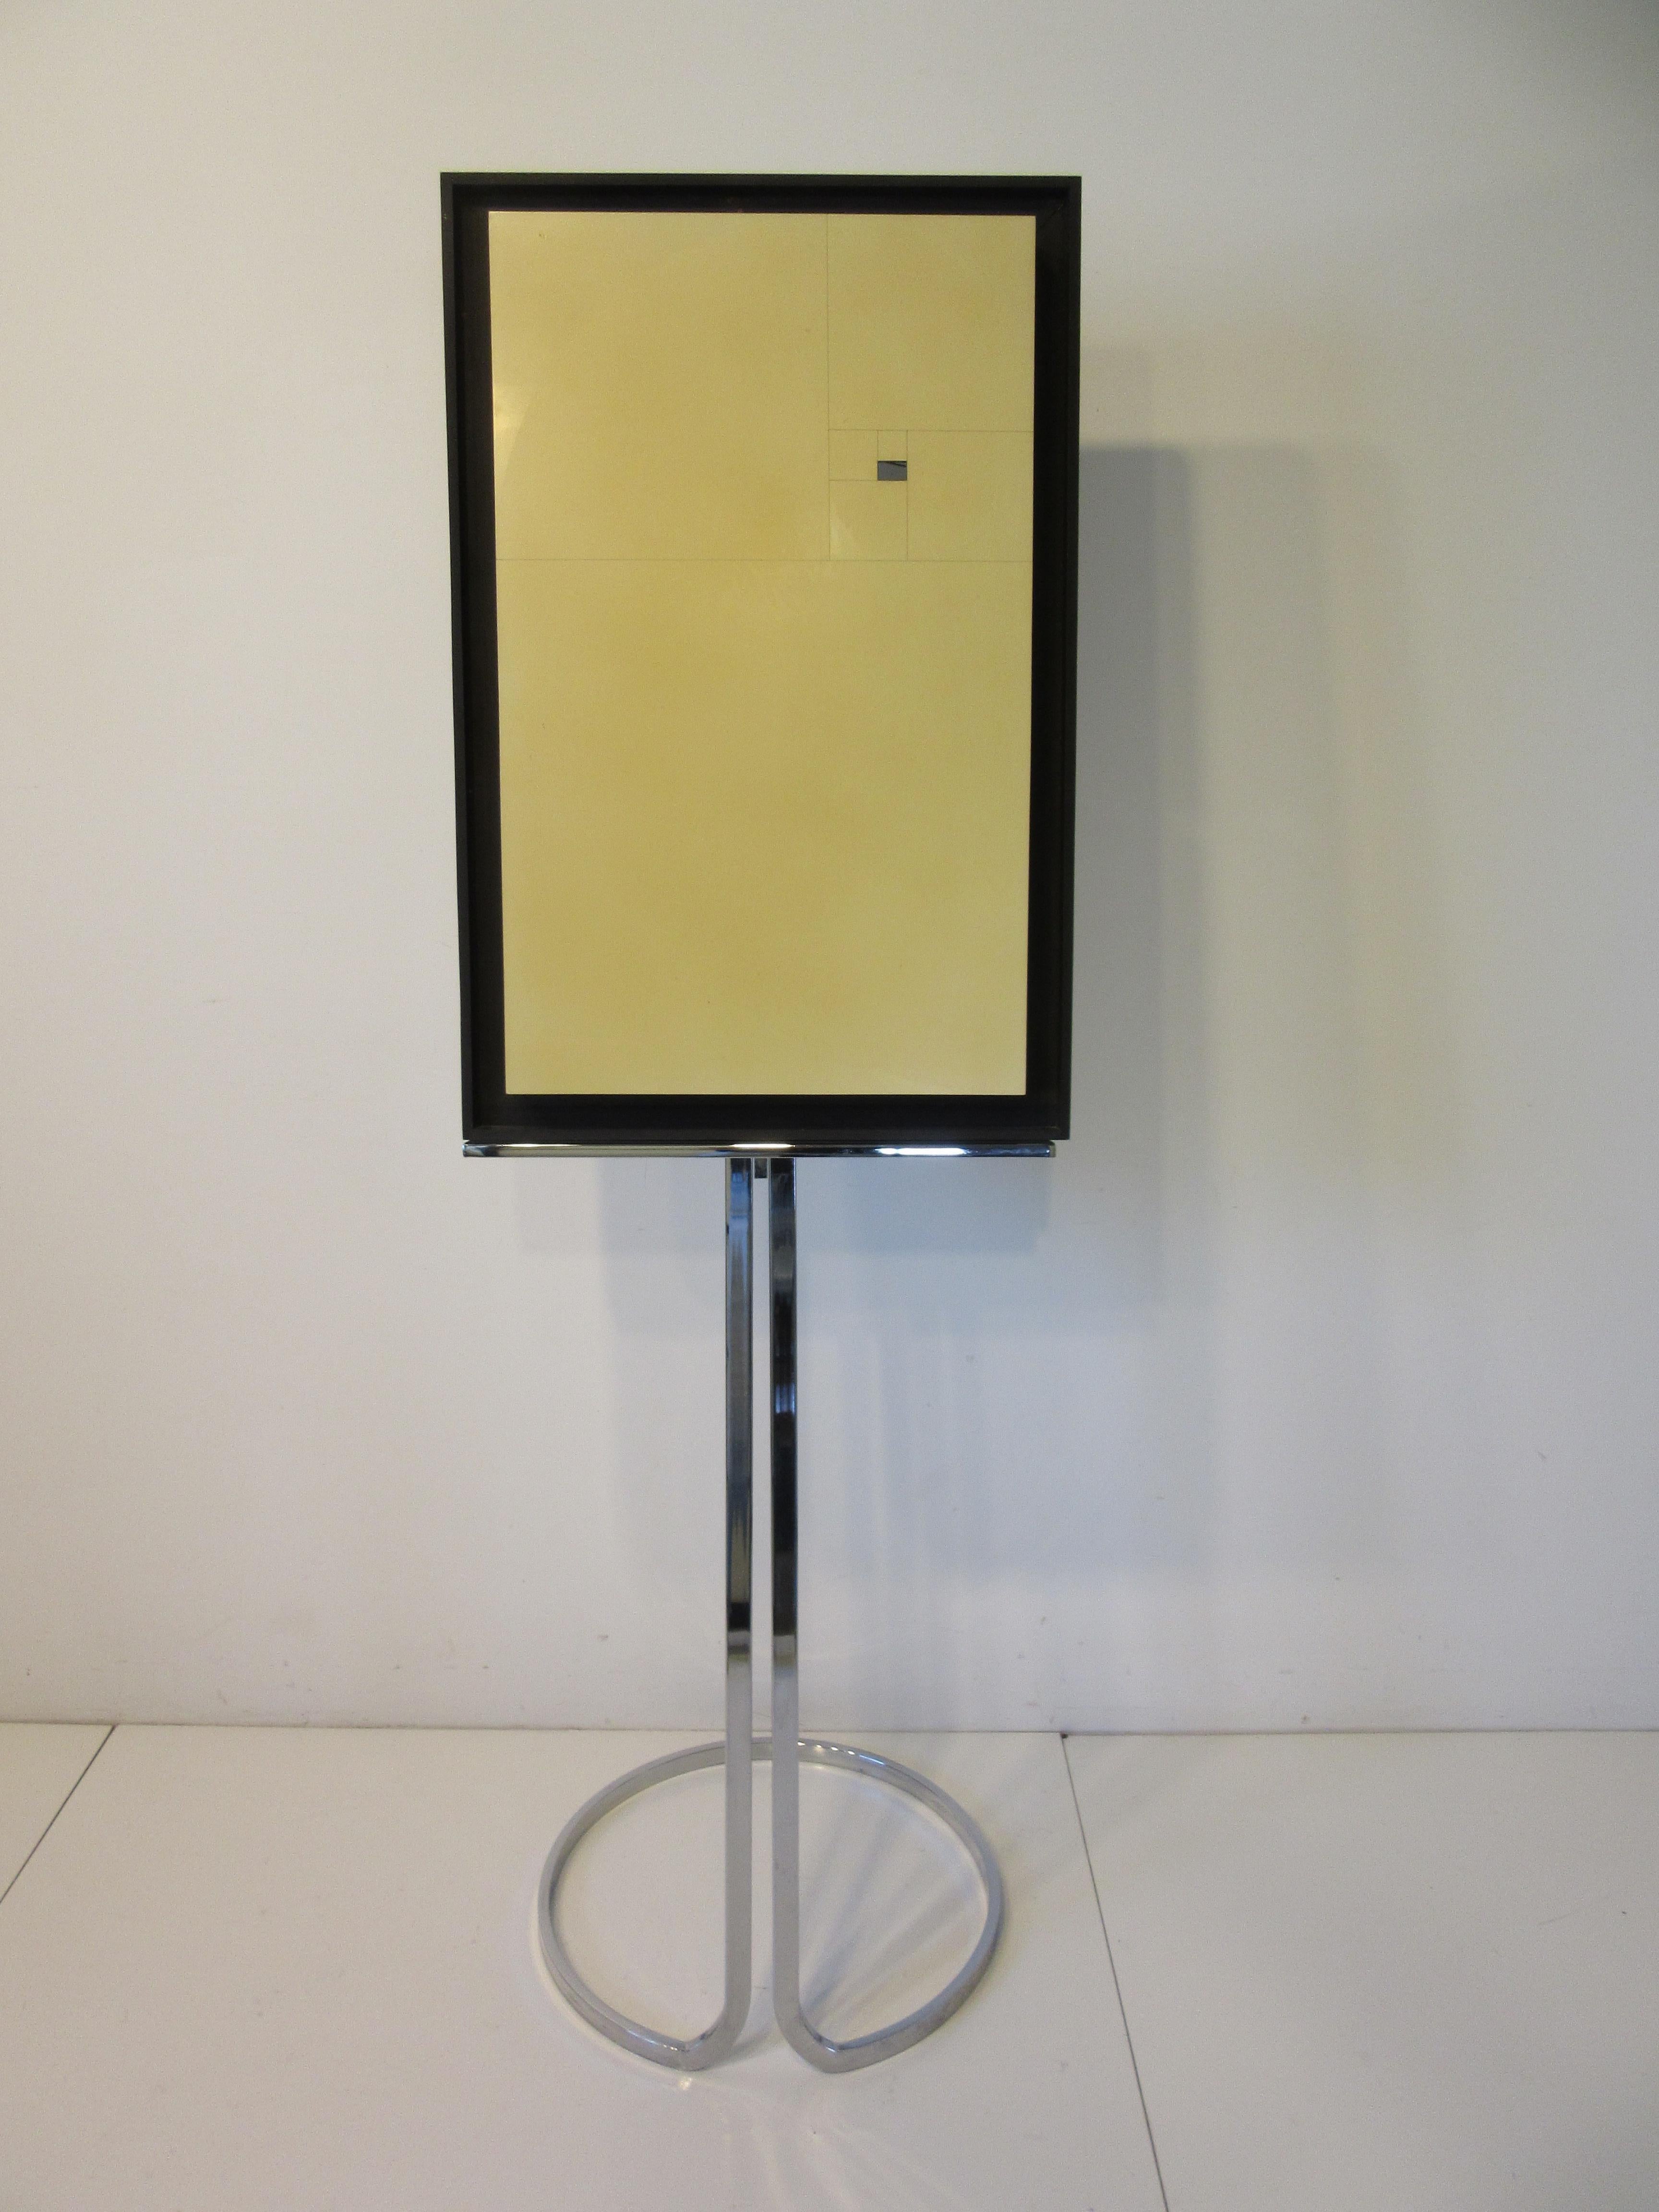 A nicely constructed adjustable chromed metal framed 1970's mid century art display easel with upper and lower thumb screw locking adjusters. Very stable with it's round base and slotted adjustment design the holding platform bar at 20.75